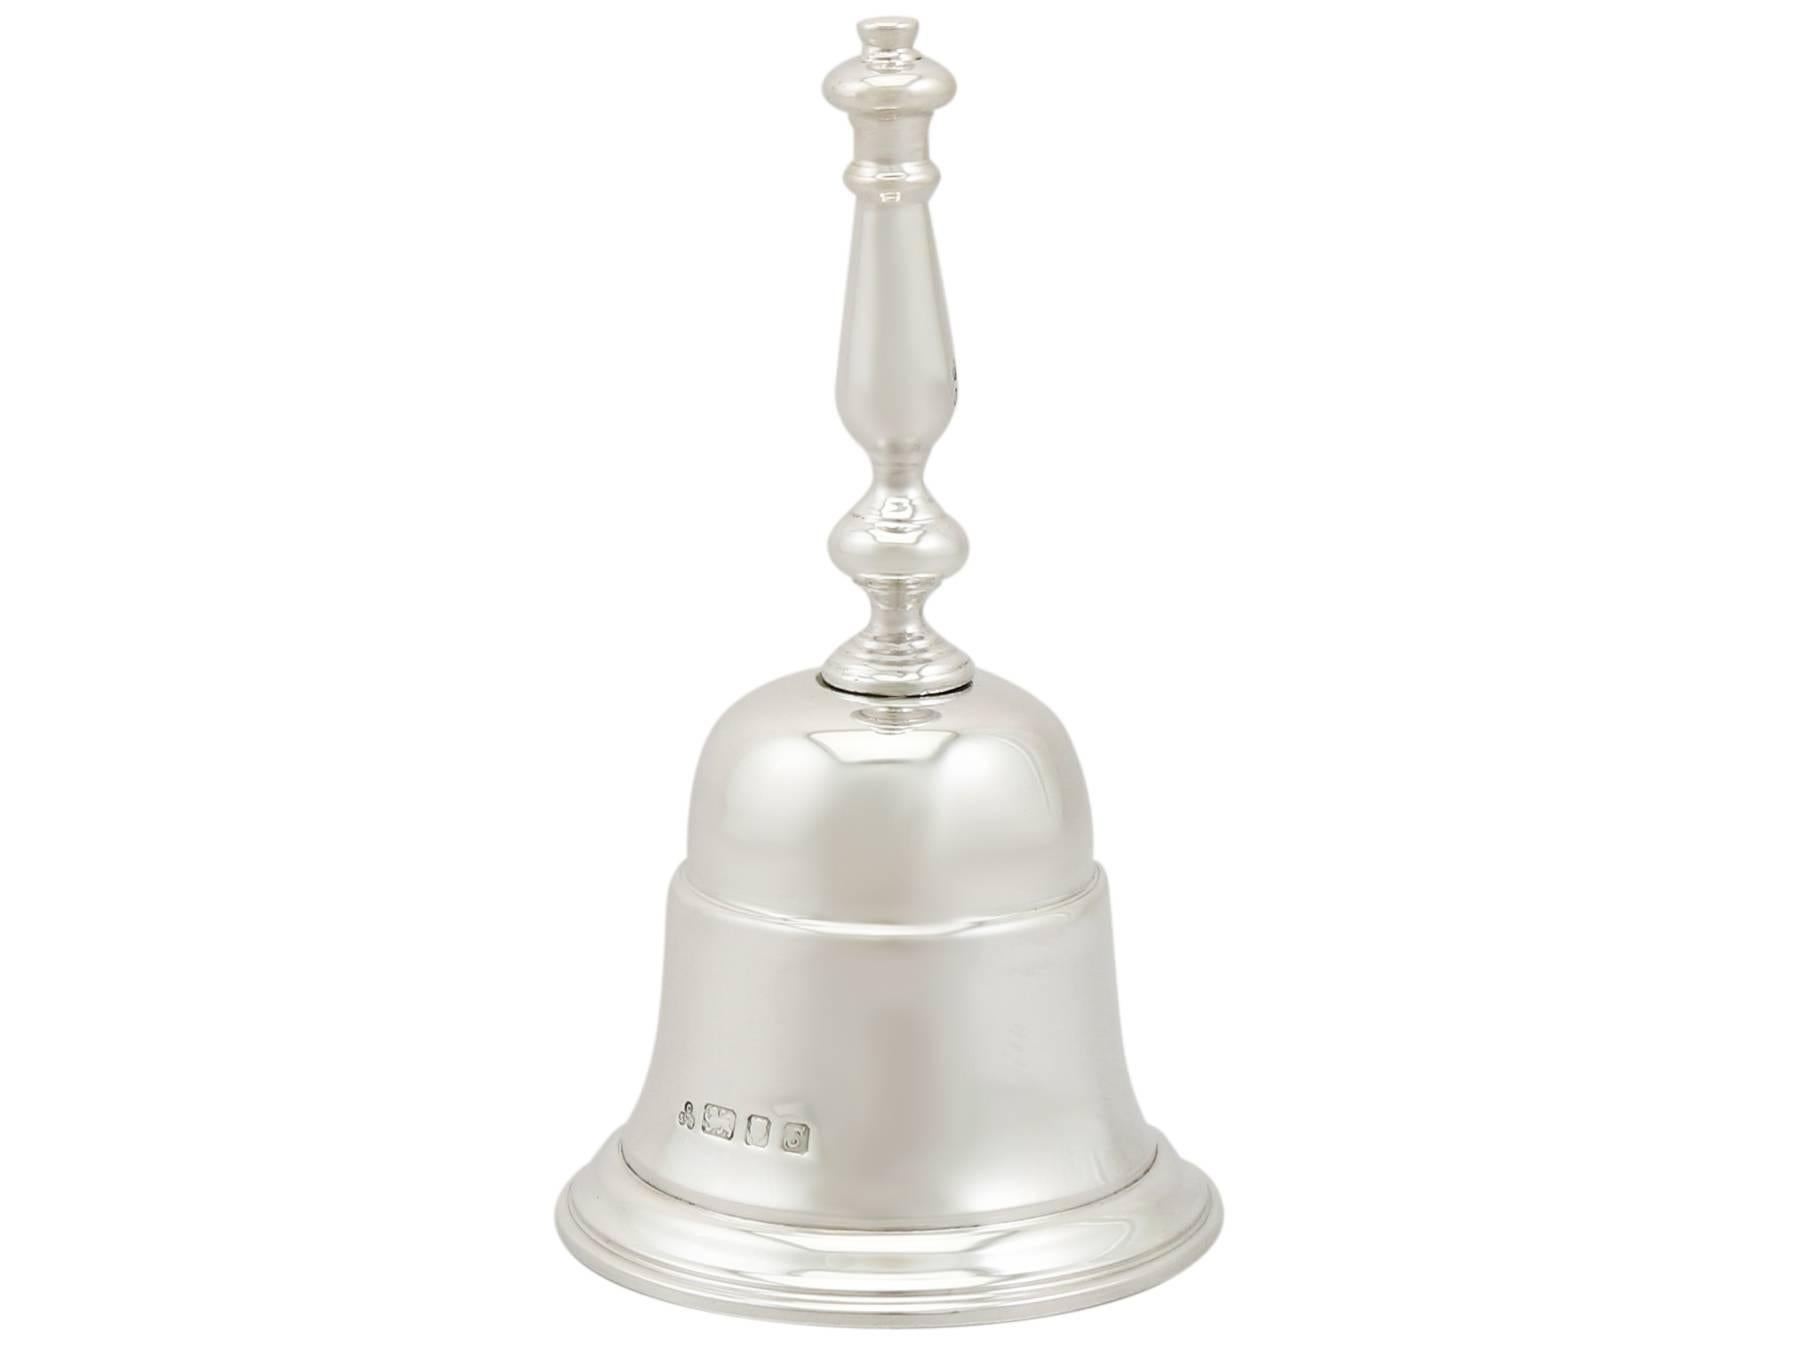 An exceptional, fine and impressive Vintage Elizabeth II sterling silver table bell; an addition to our range of ornamental silverware

This fine vintage Elizabeth II sterling silver table bell has a plain bell shaped form.

The surface of this